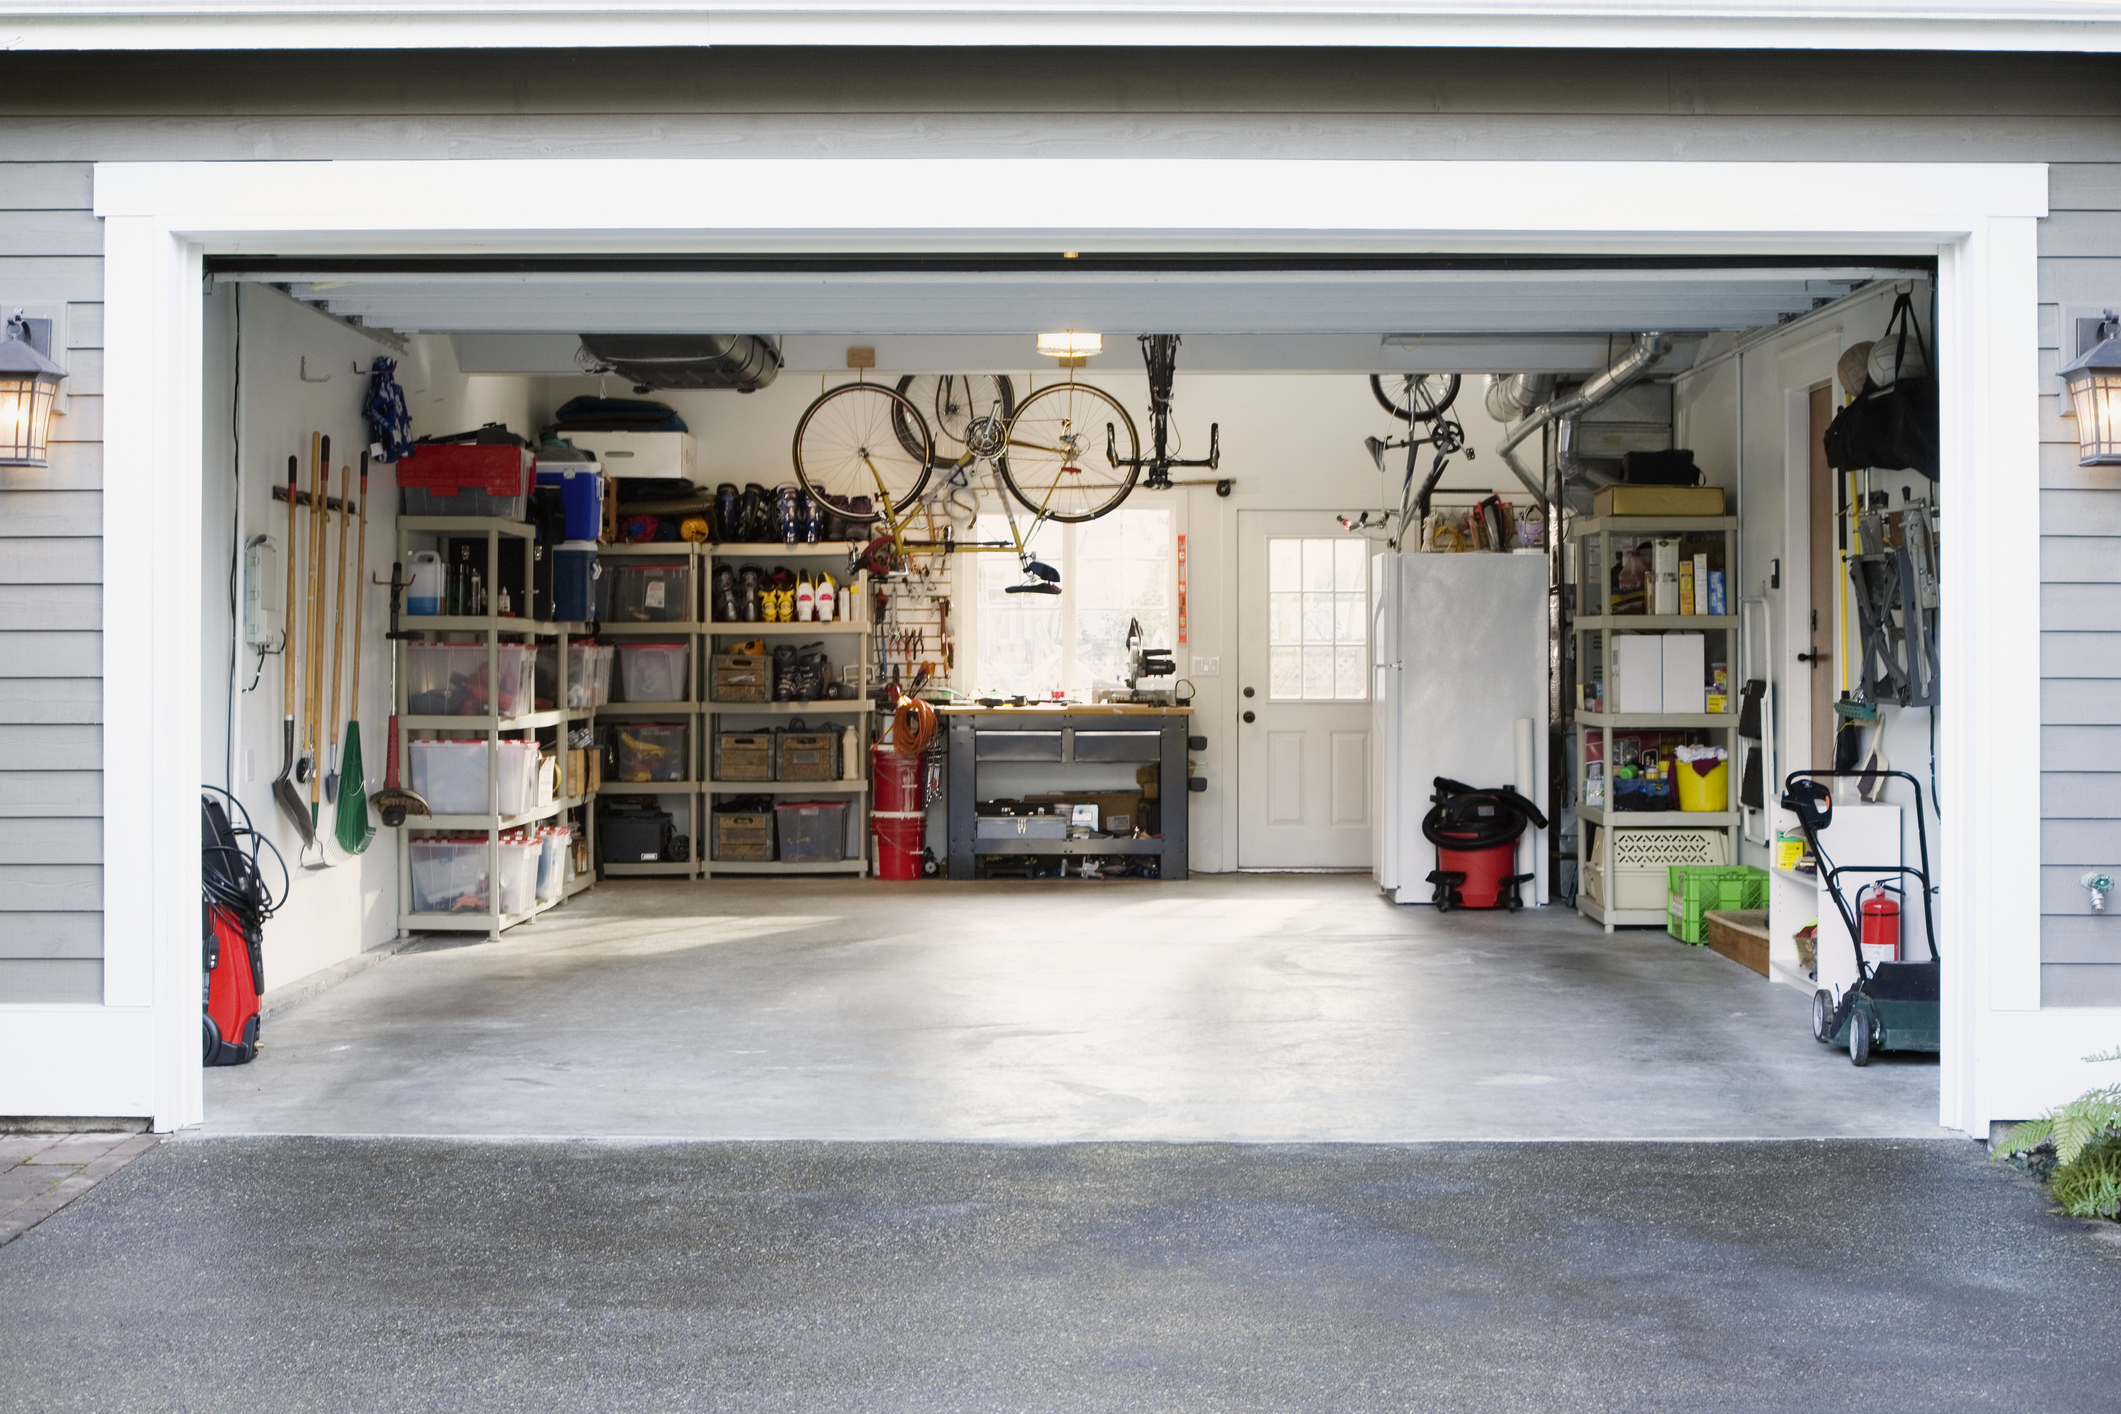 Building A Garage Addition, How Much Does It Cost To Add A Room Above Garage Door